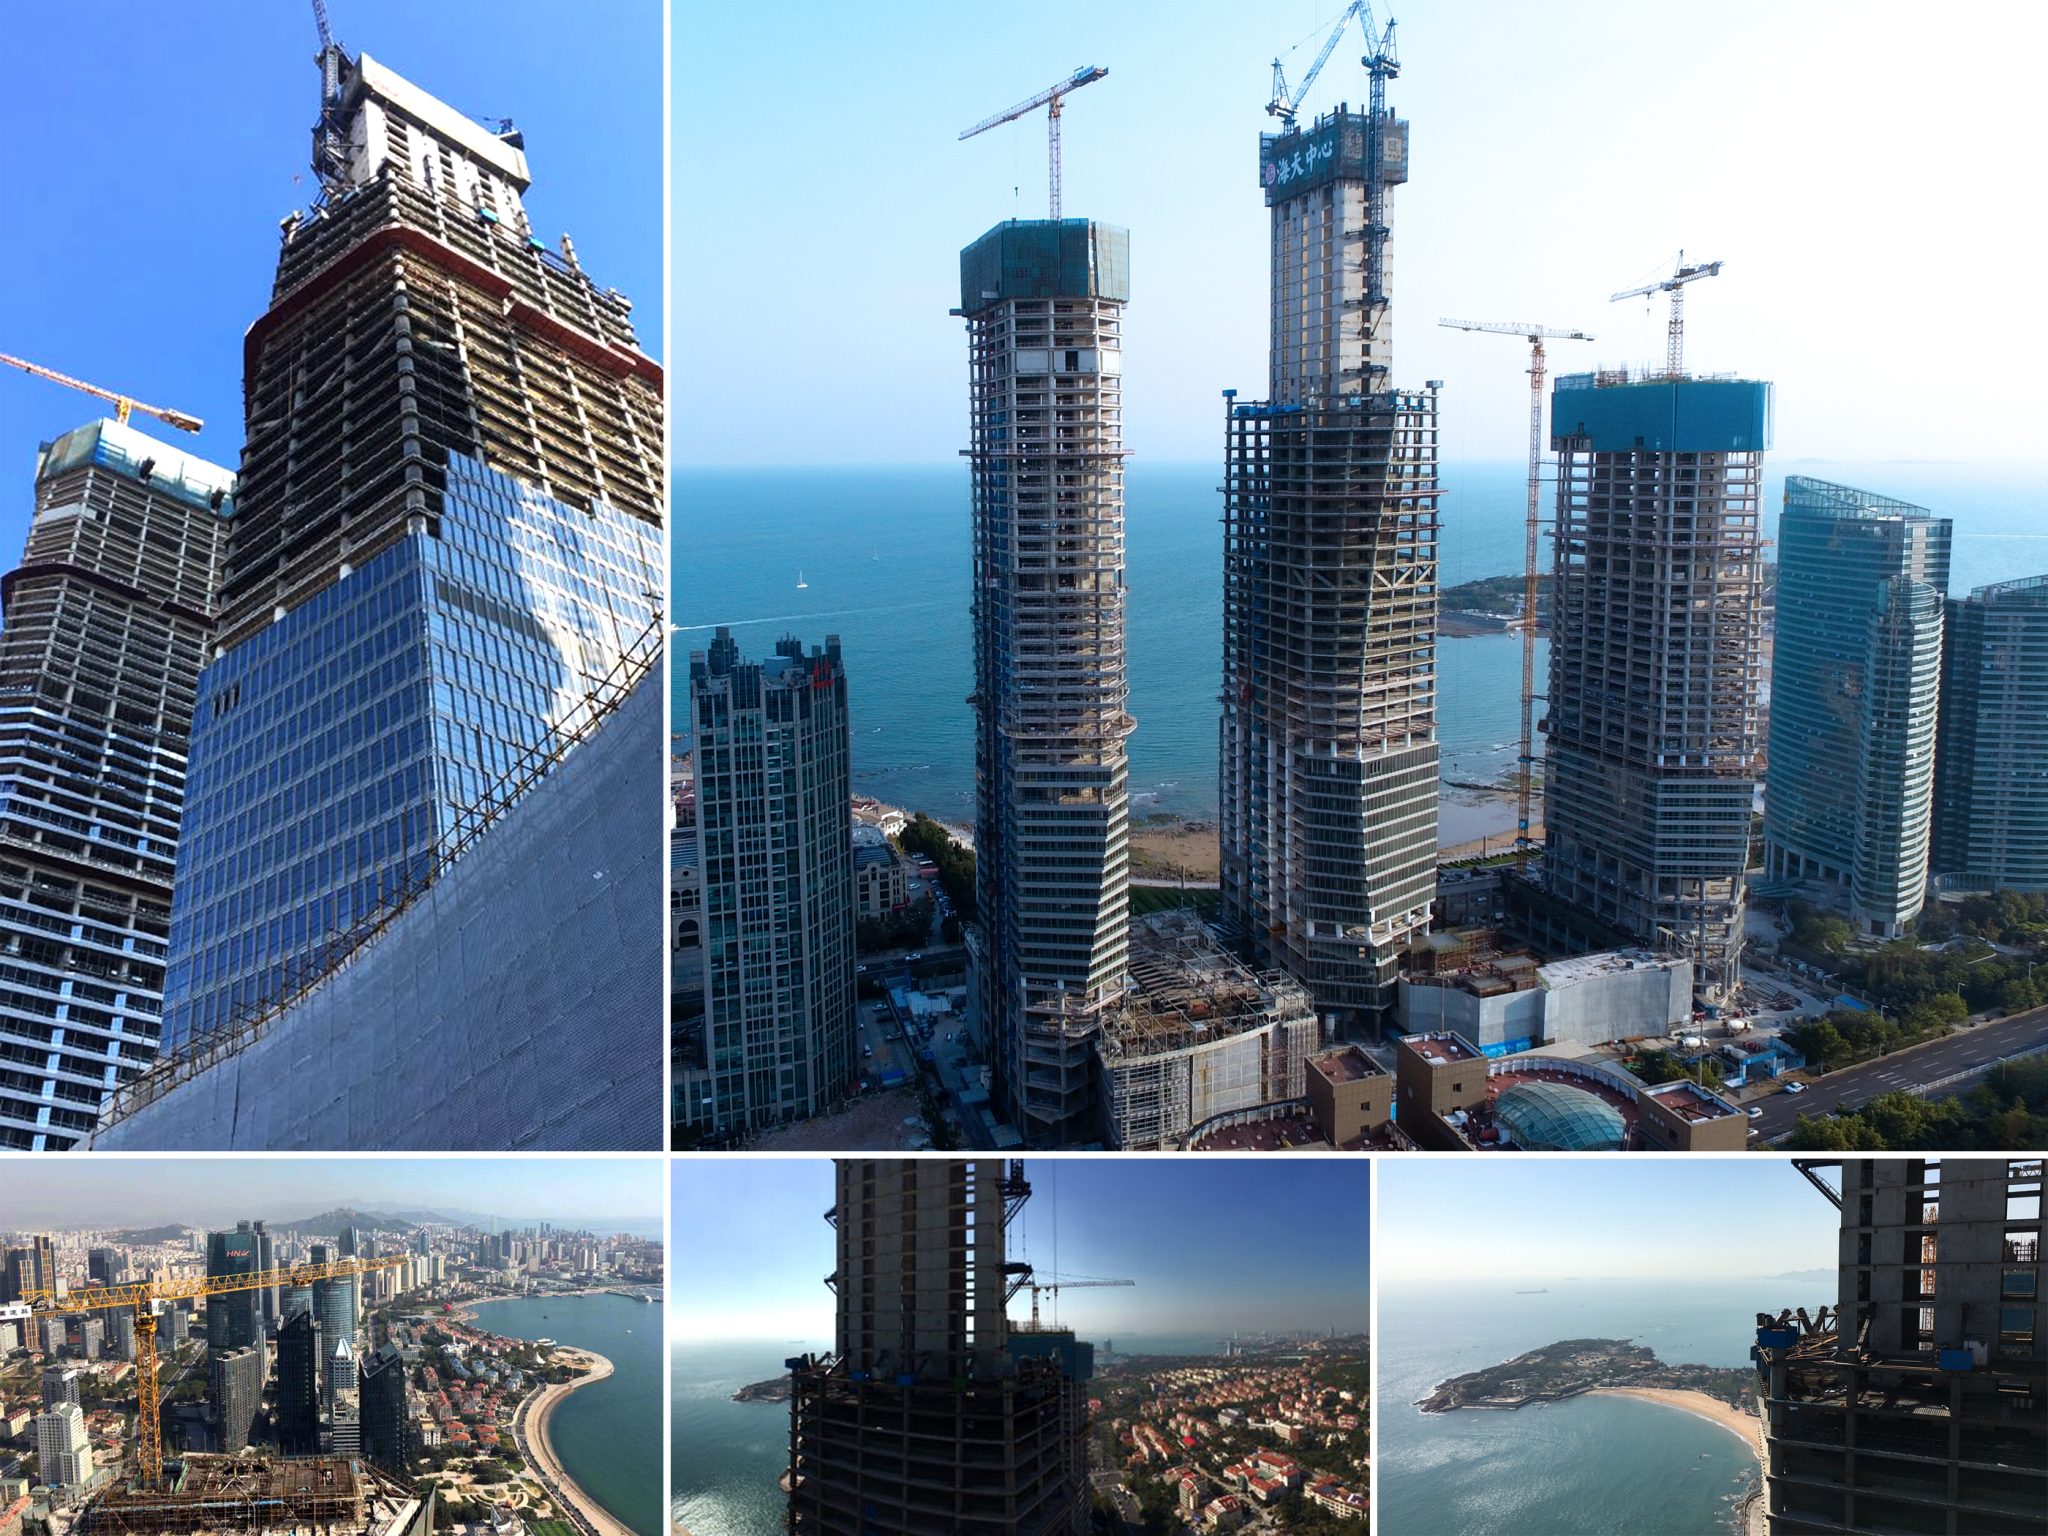 Construction progress on super high-rise project in Qingdao China